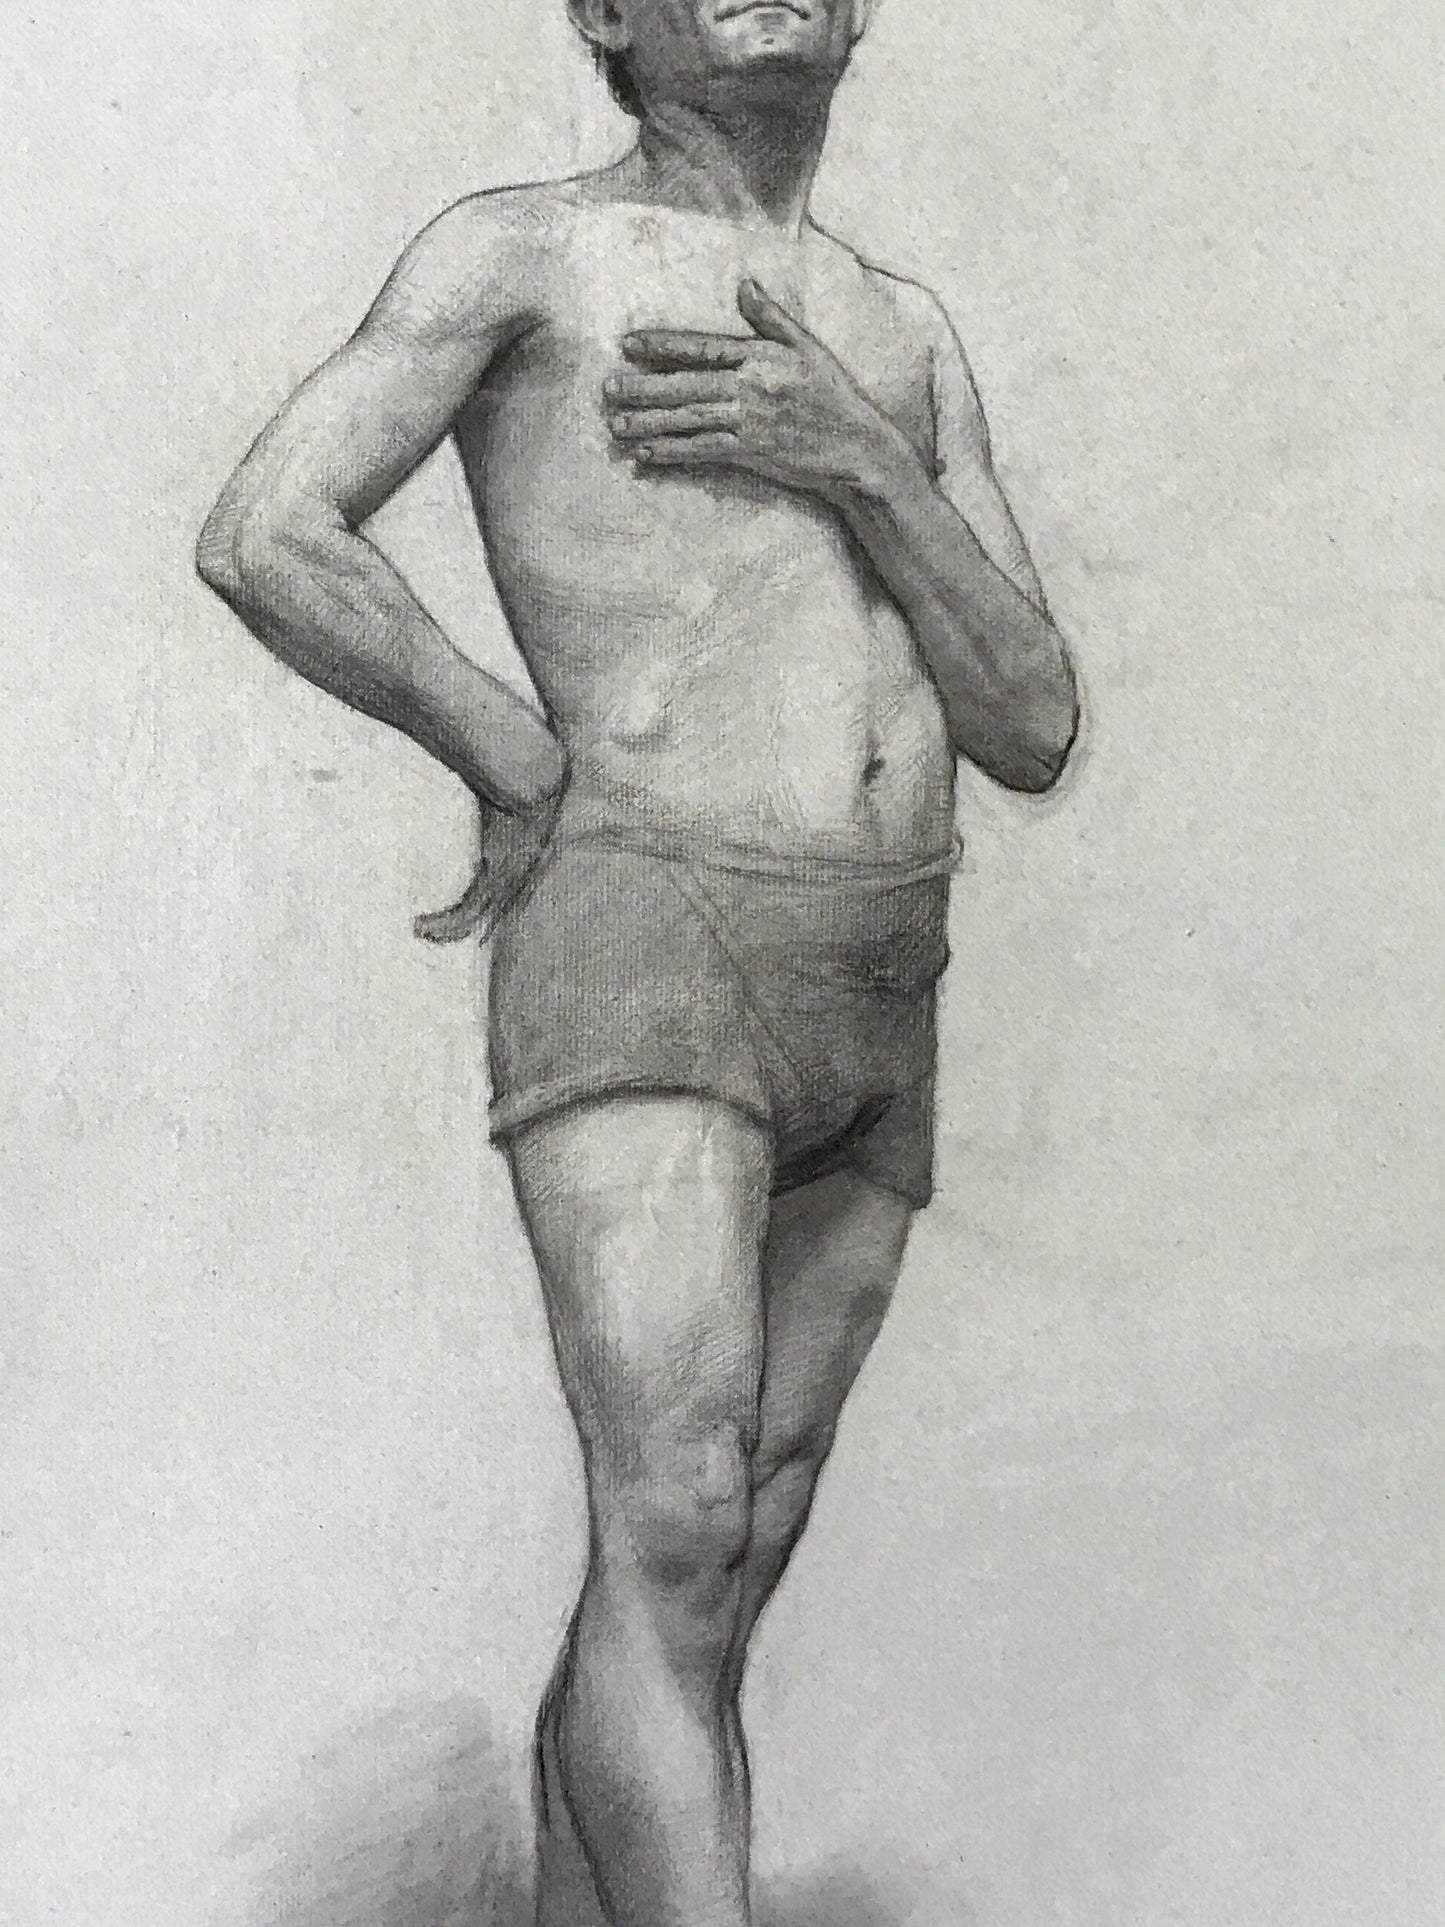 A Original Charcoal life Drawing of a Man. A French Art School Piece. Early 1900’s. Large: 61 x 49 cms.